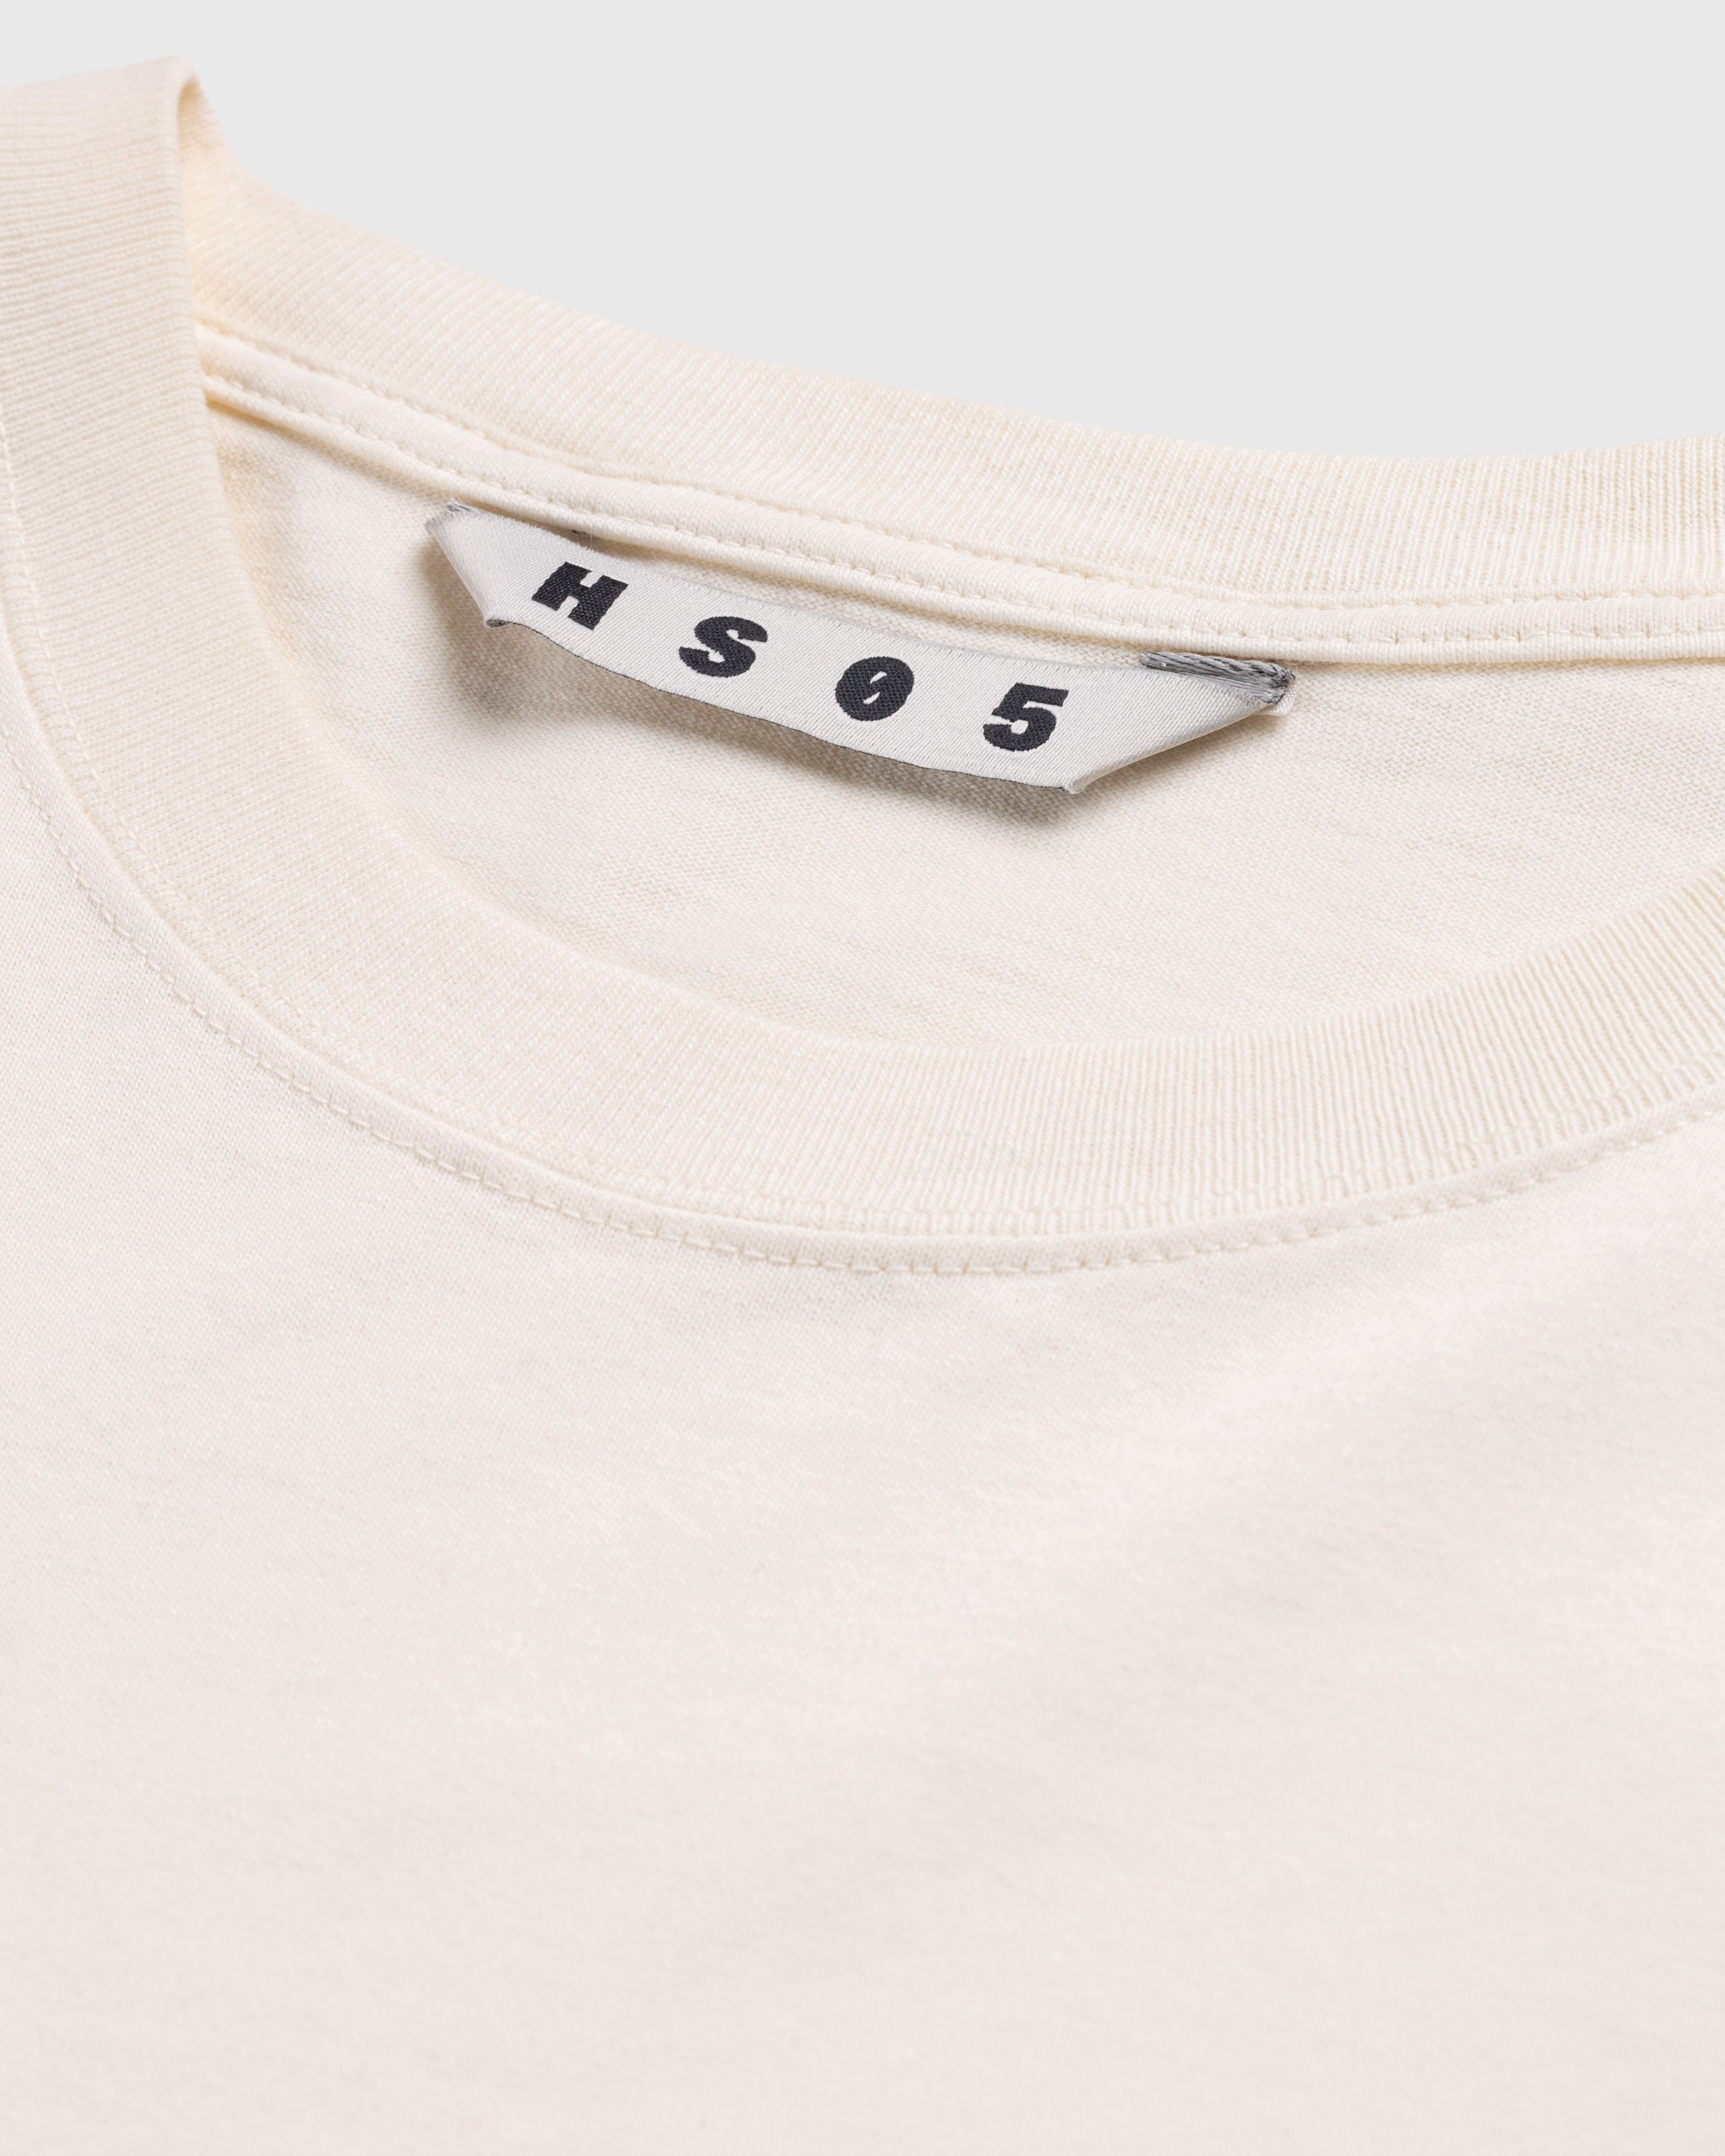 Highsnobiety HS05 – Pigment Dyed Boxy Long Sleeves Jersey Natural - Longsleeves - Beige - Image 6